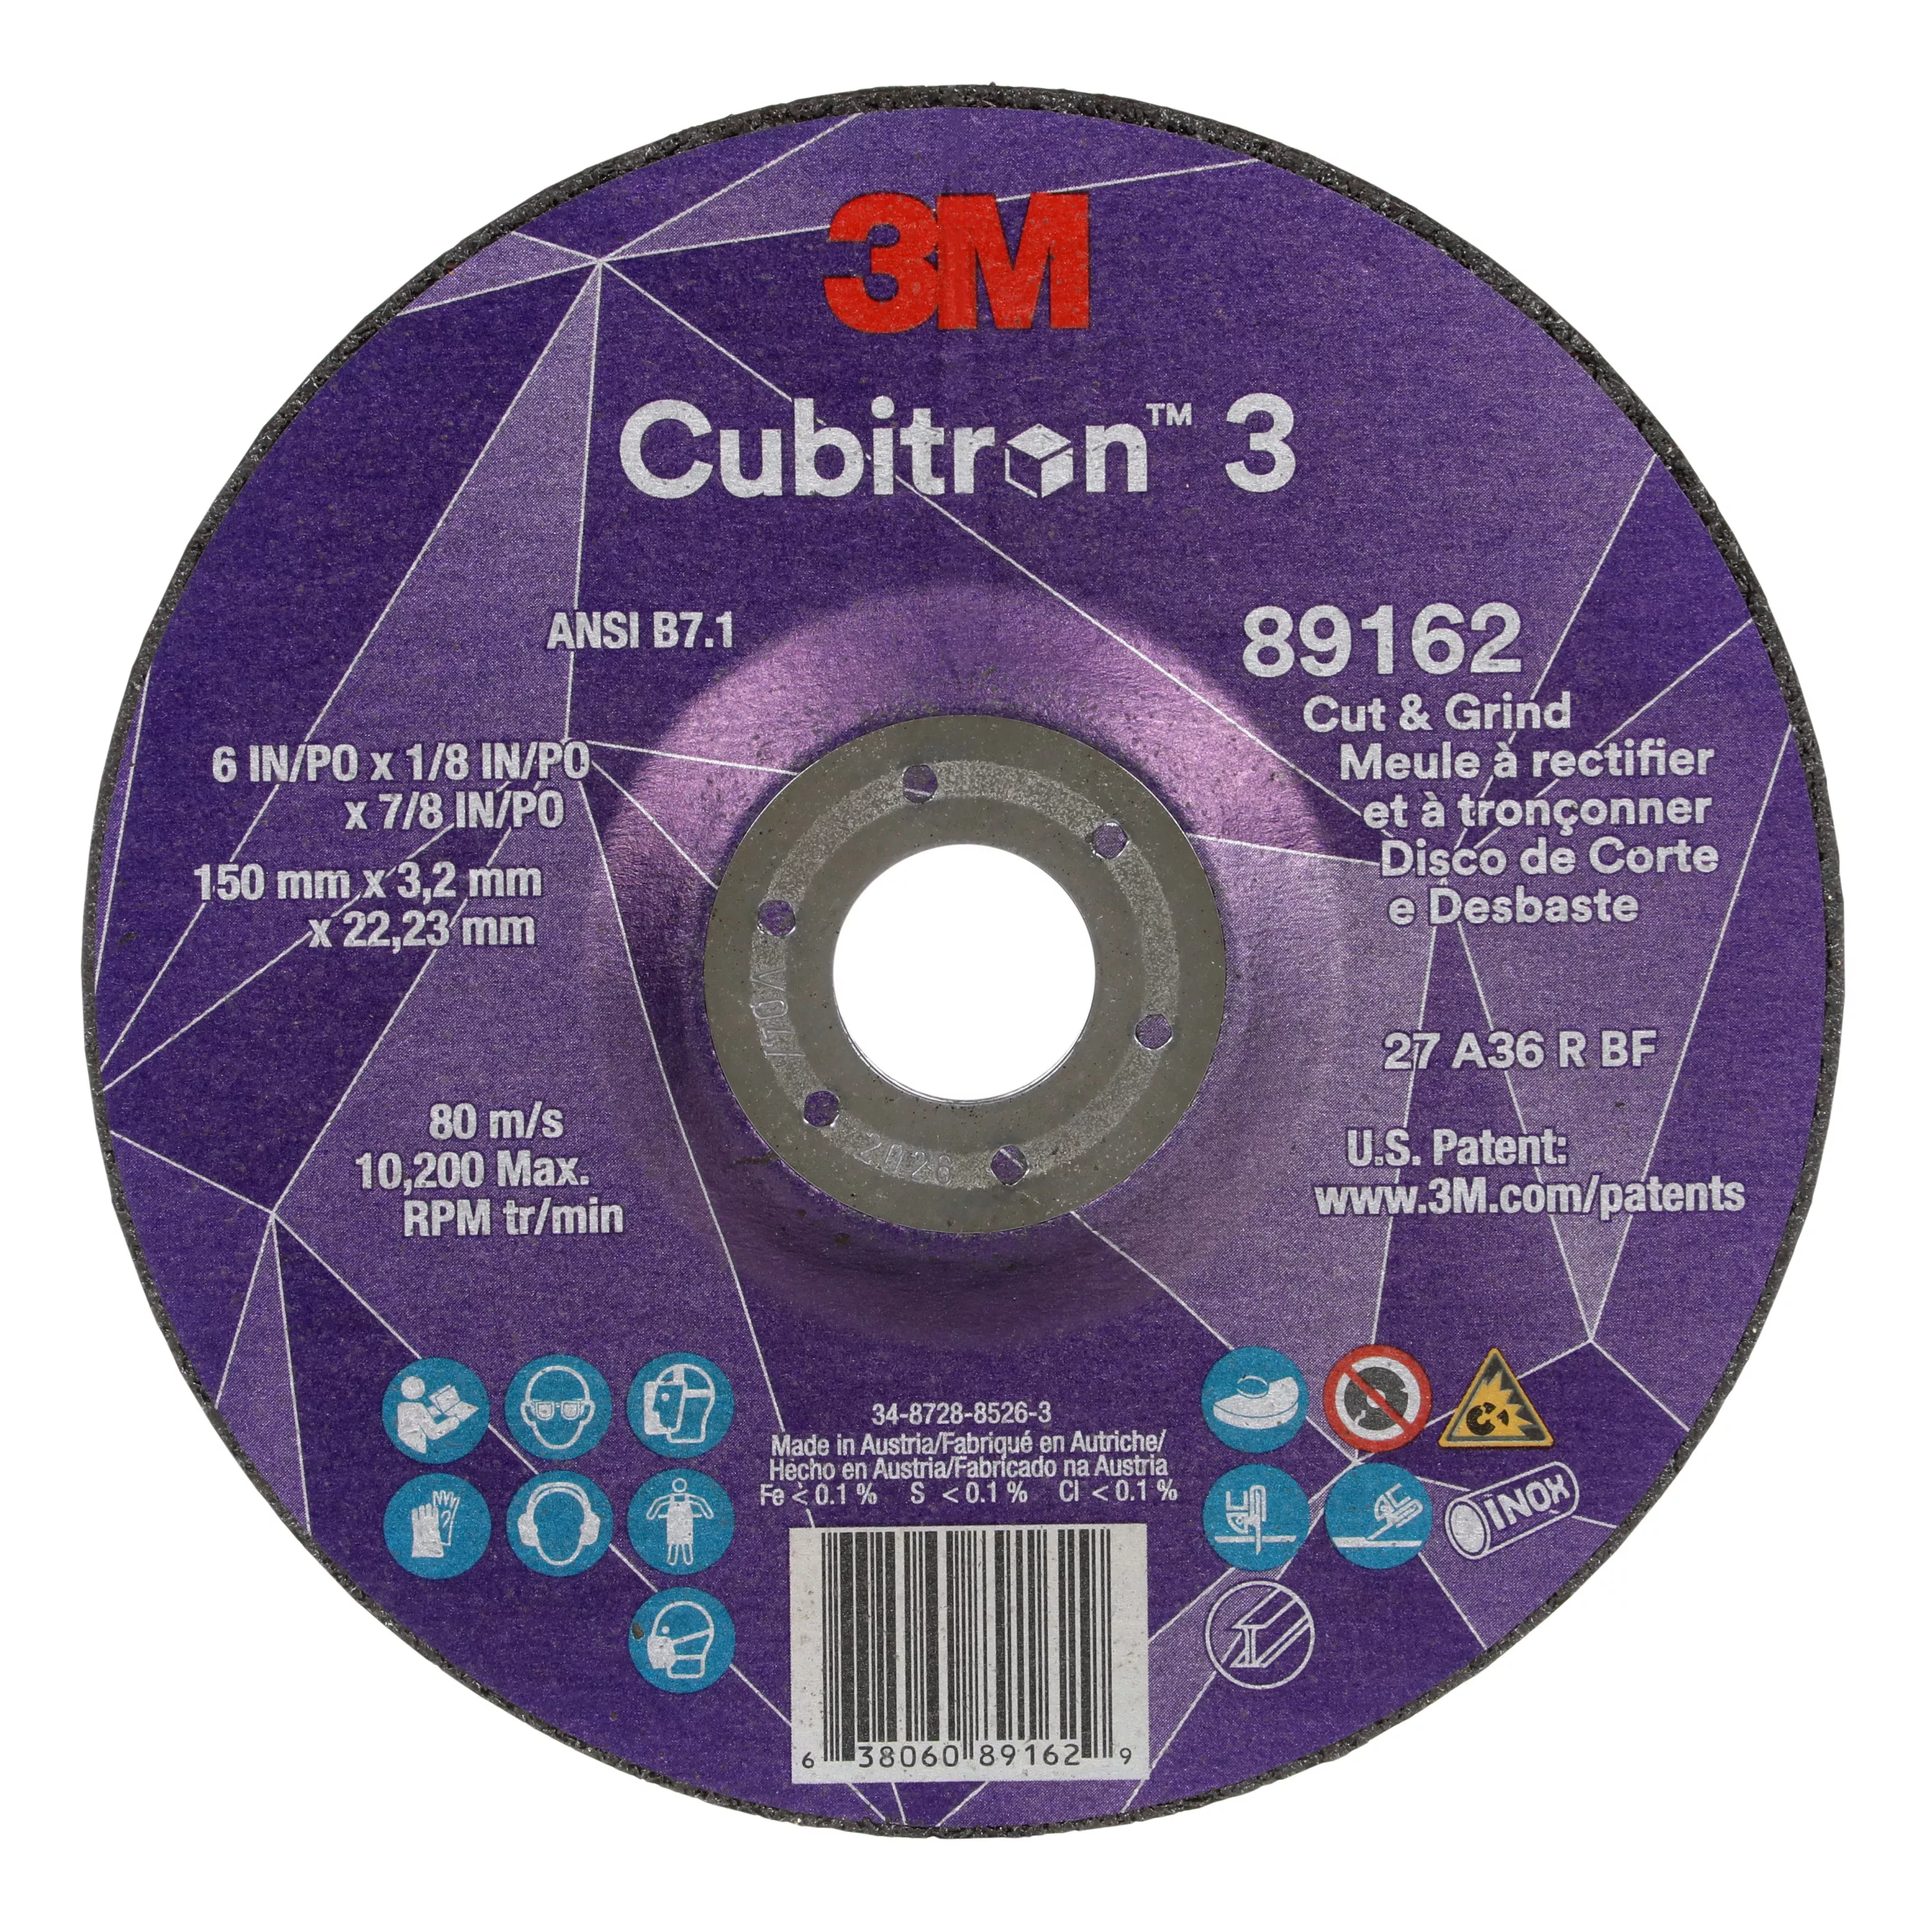 3M™ Cubitron™ 3 Cut and Grind Wheel, 89162, 36+, T27, 6 in x 1/8 in x
7/8 in (150 x 3.2 x 22.23 mm), ANSI, 10/Pack, 20 ea/Case